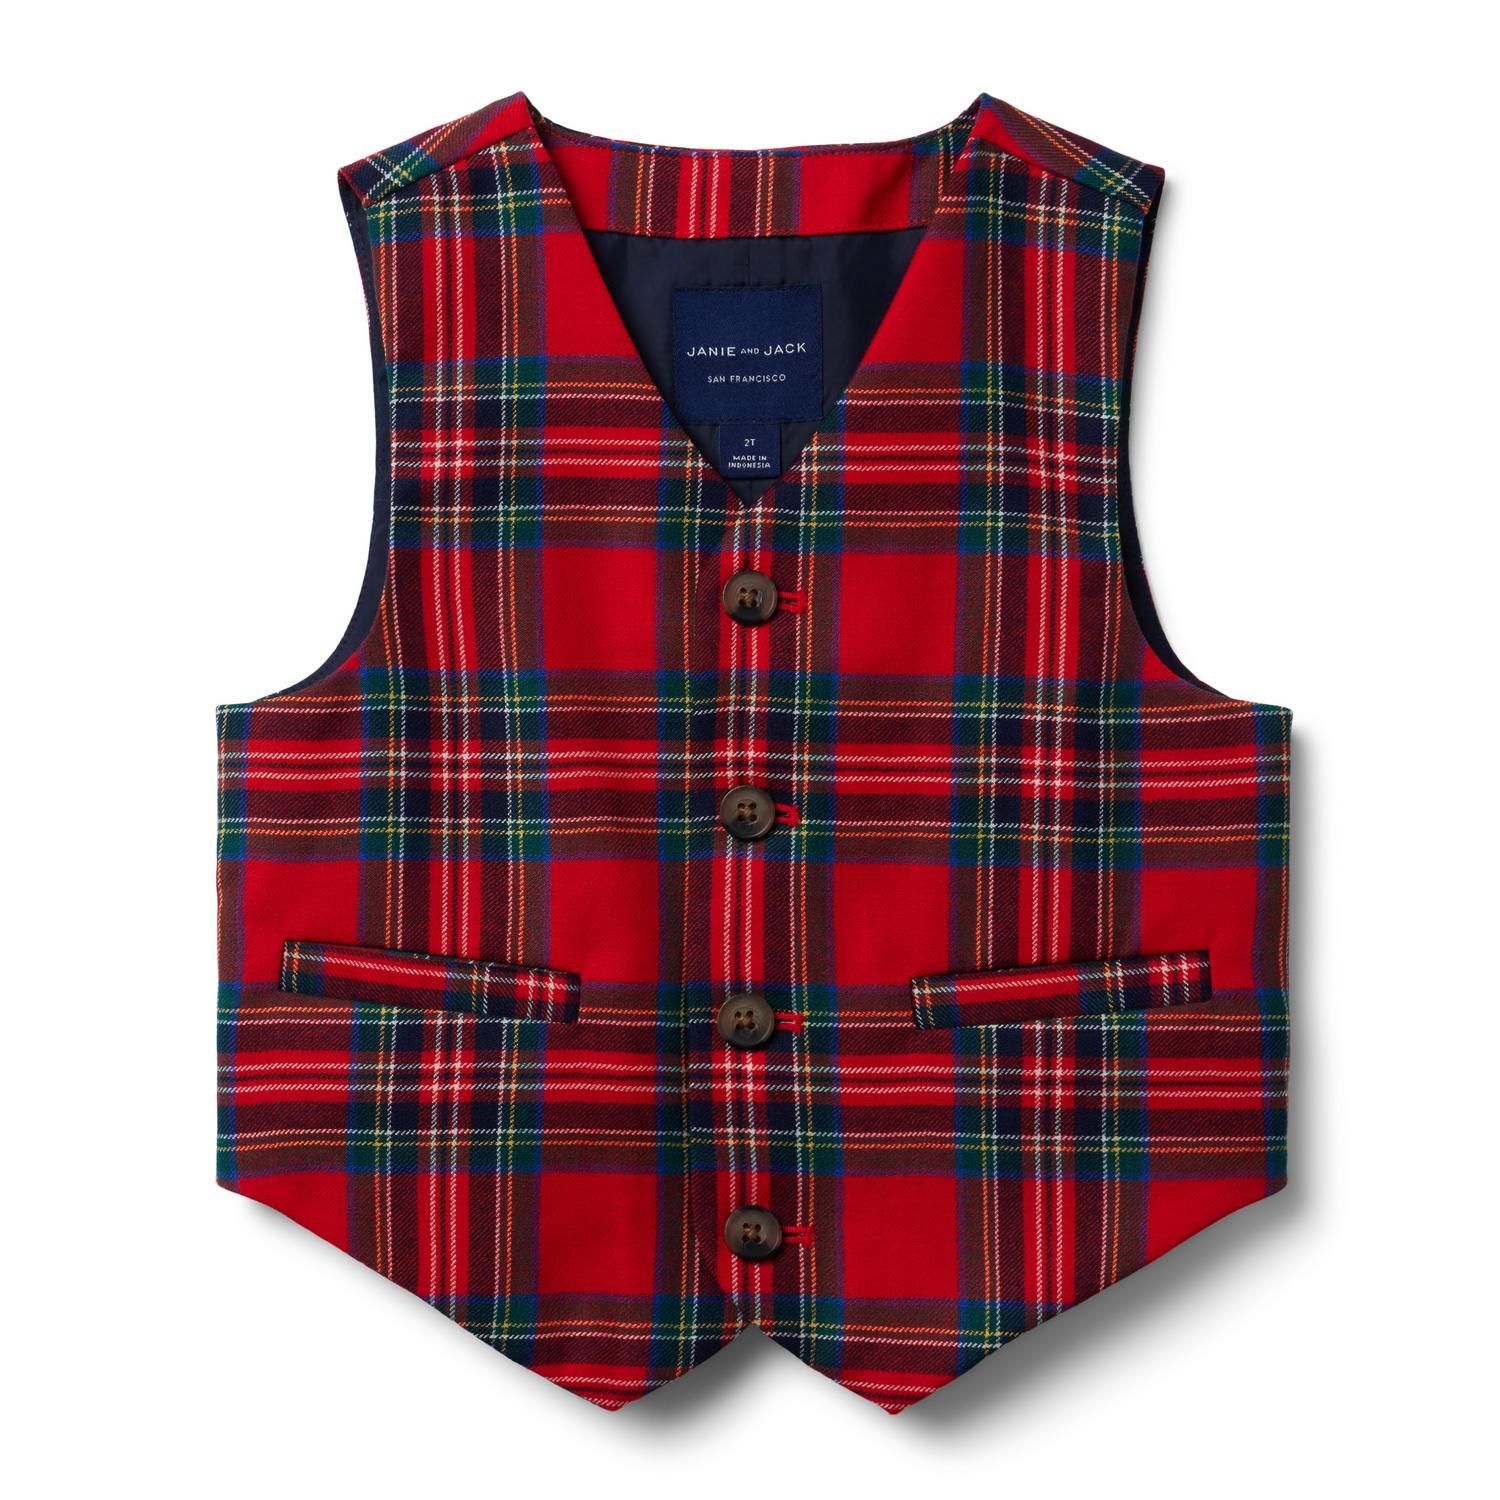 The Tartan Holiday Vest | Janie and Jack